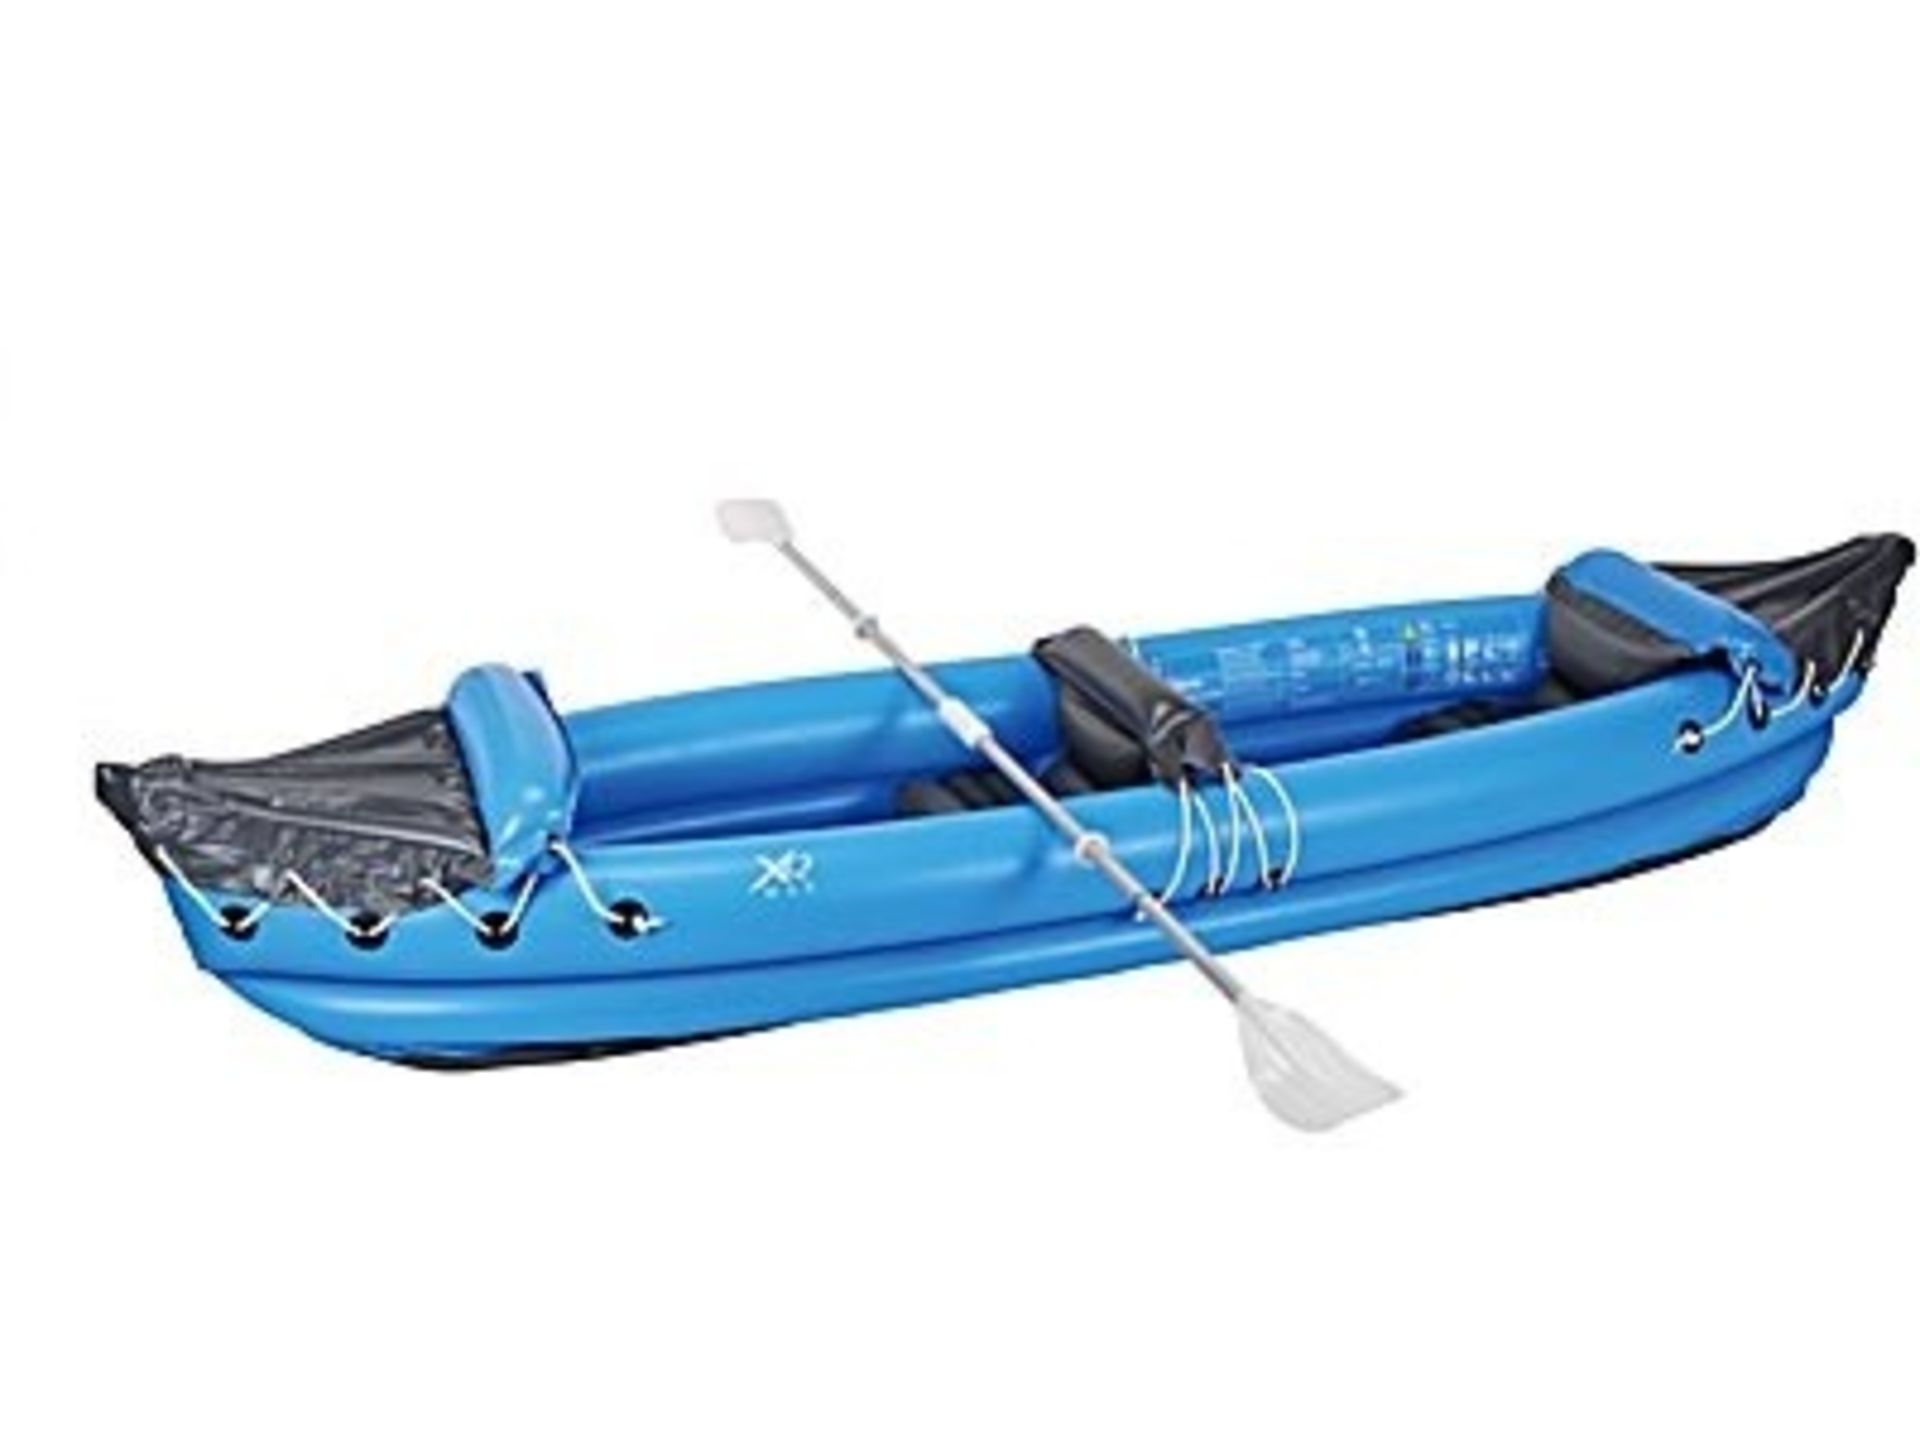 V *TRADE QTY* Brand New 2 Person Inflatable Kayak/Canoe with Paddles - Constructed from Durable